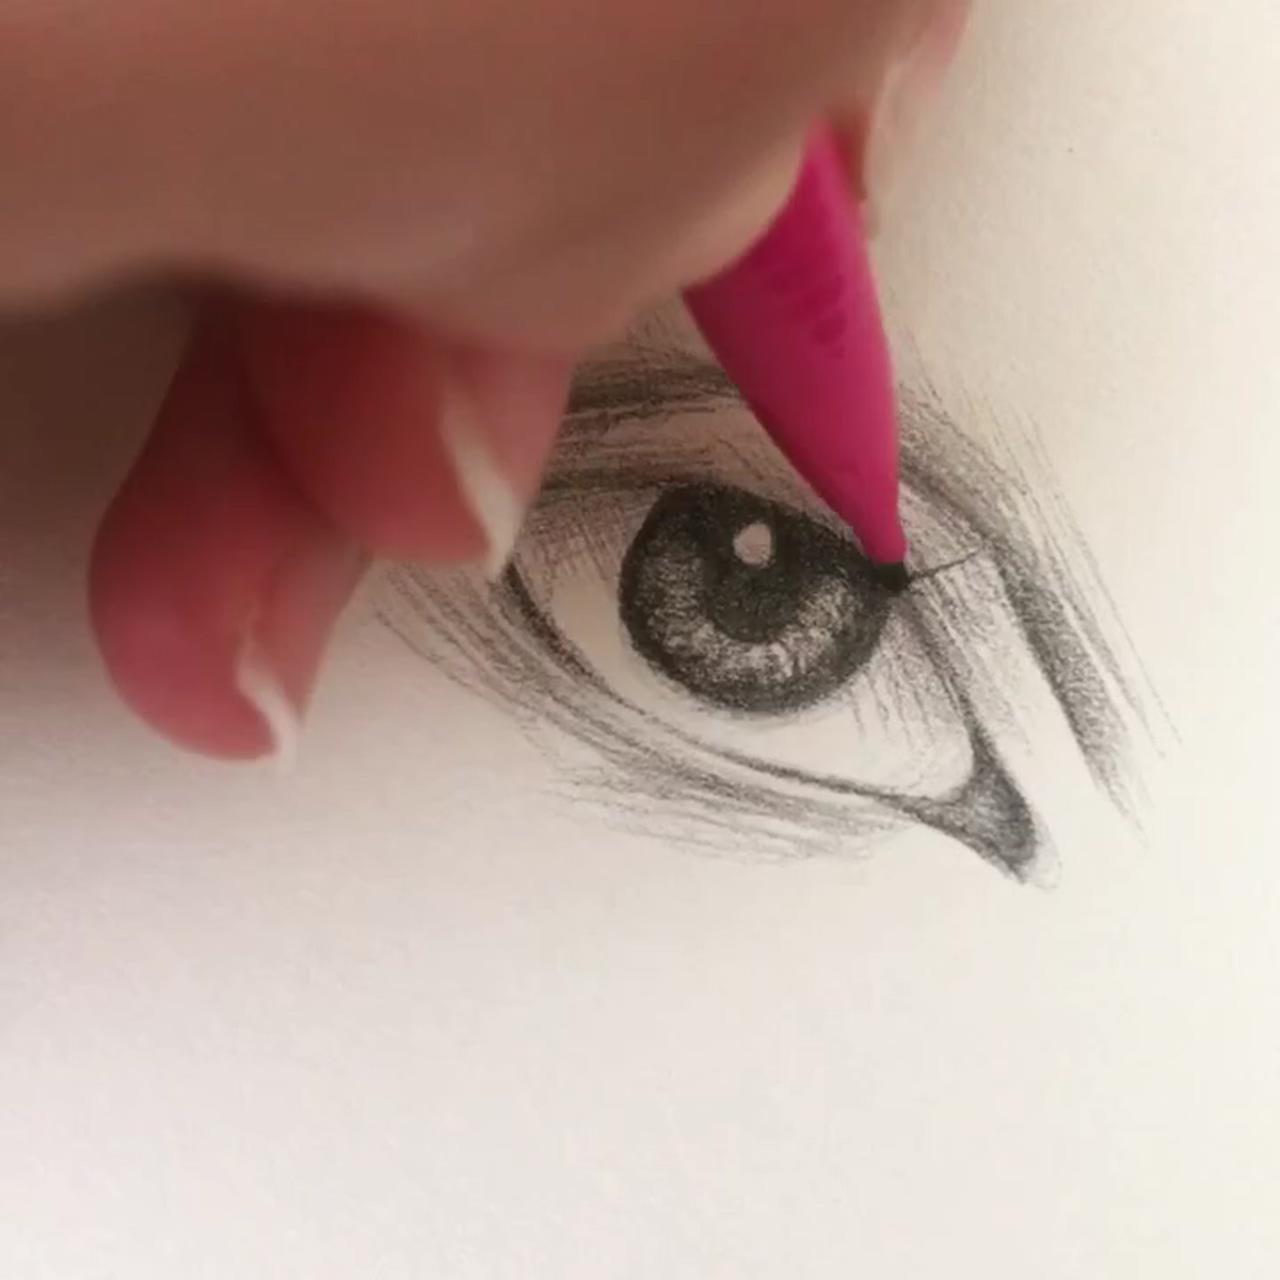 How to draw eyes | 3d art drawing